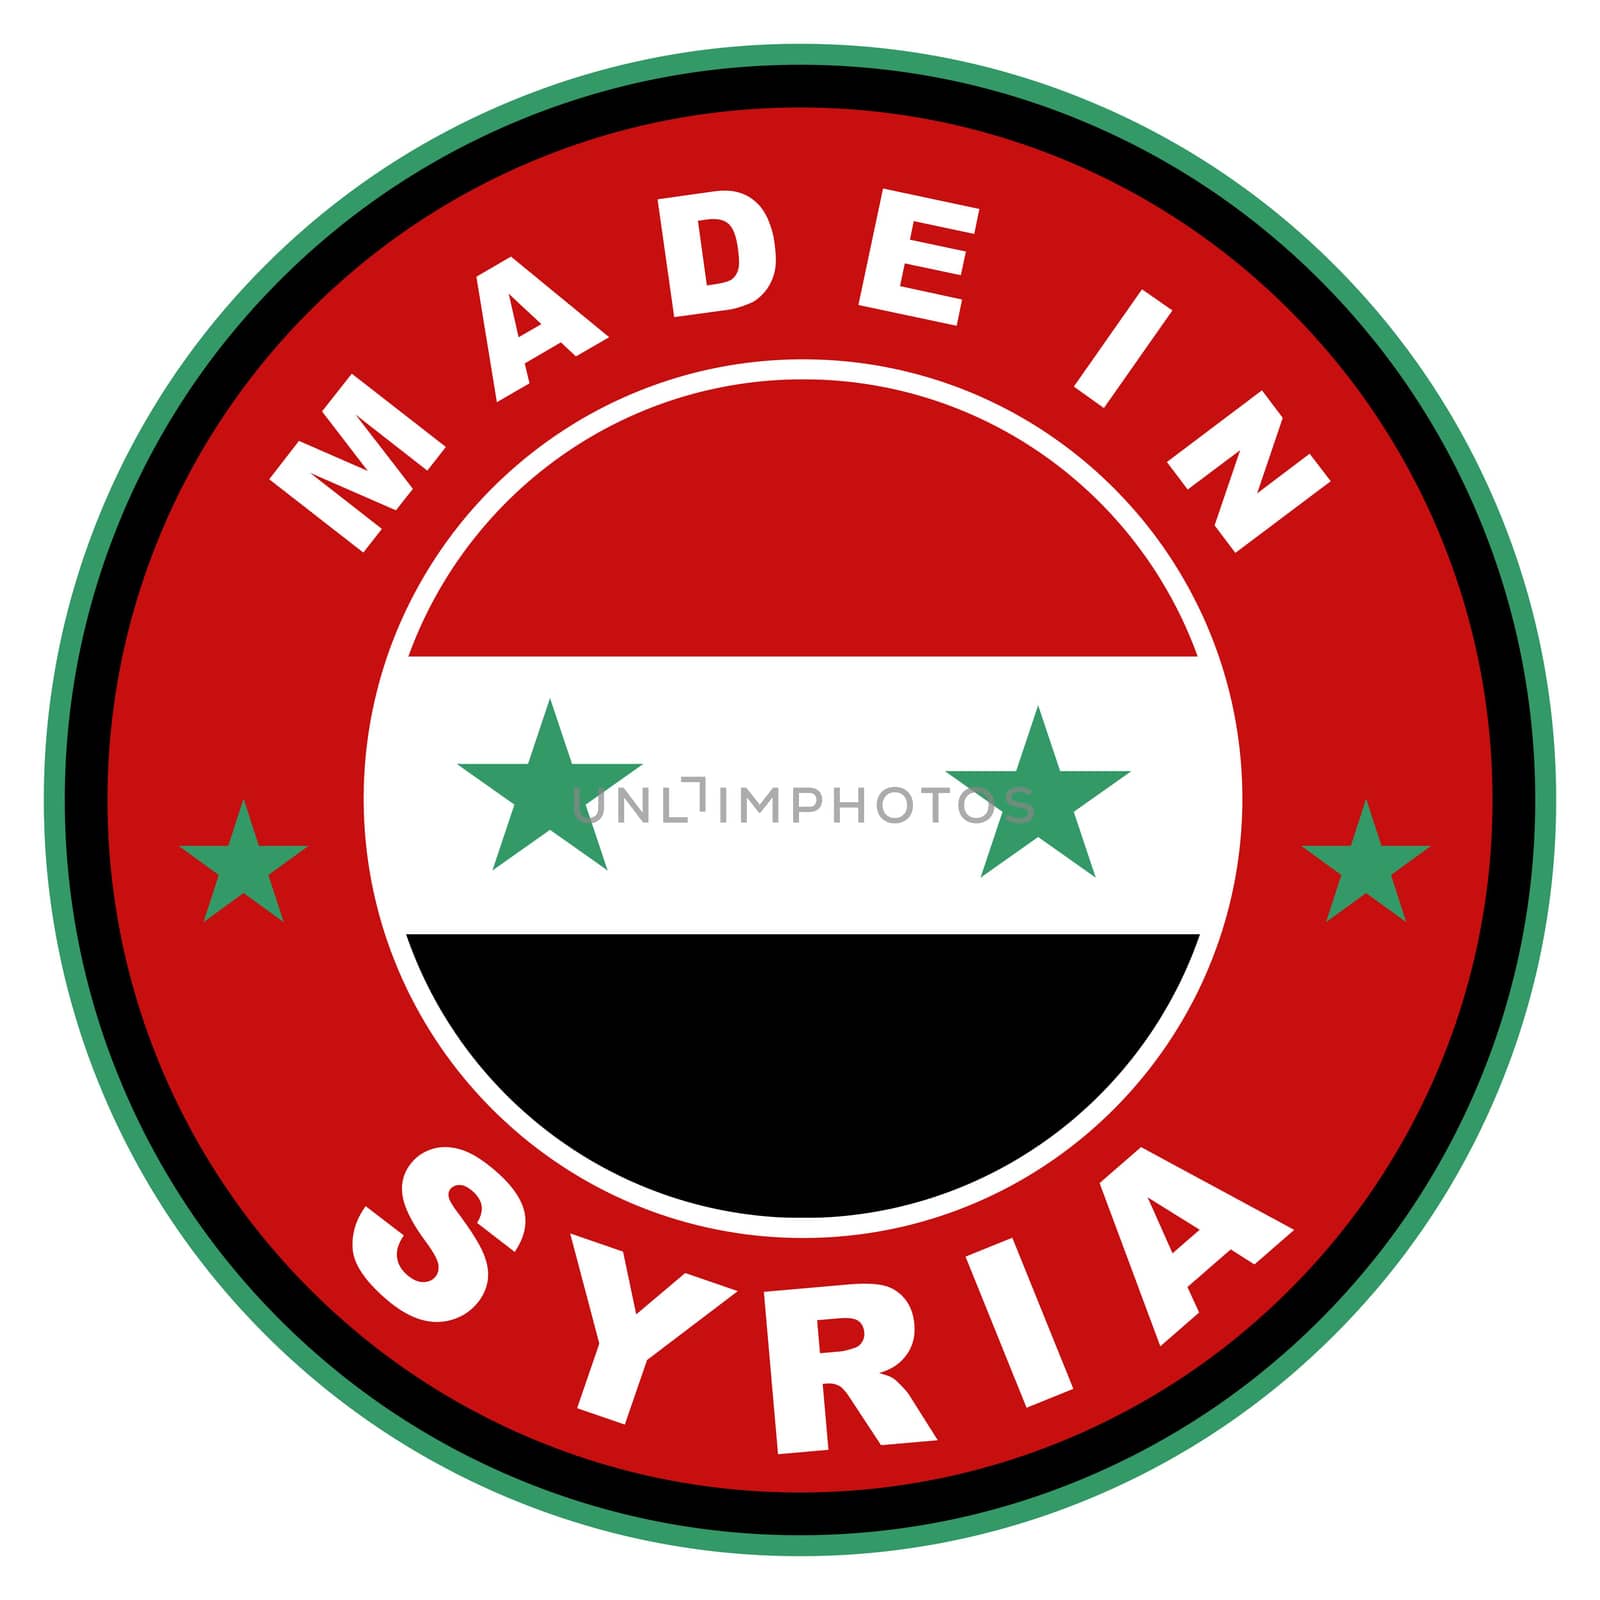 very big size made in syria label illustratioan